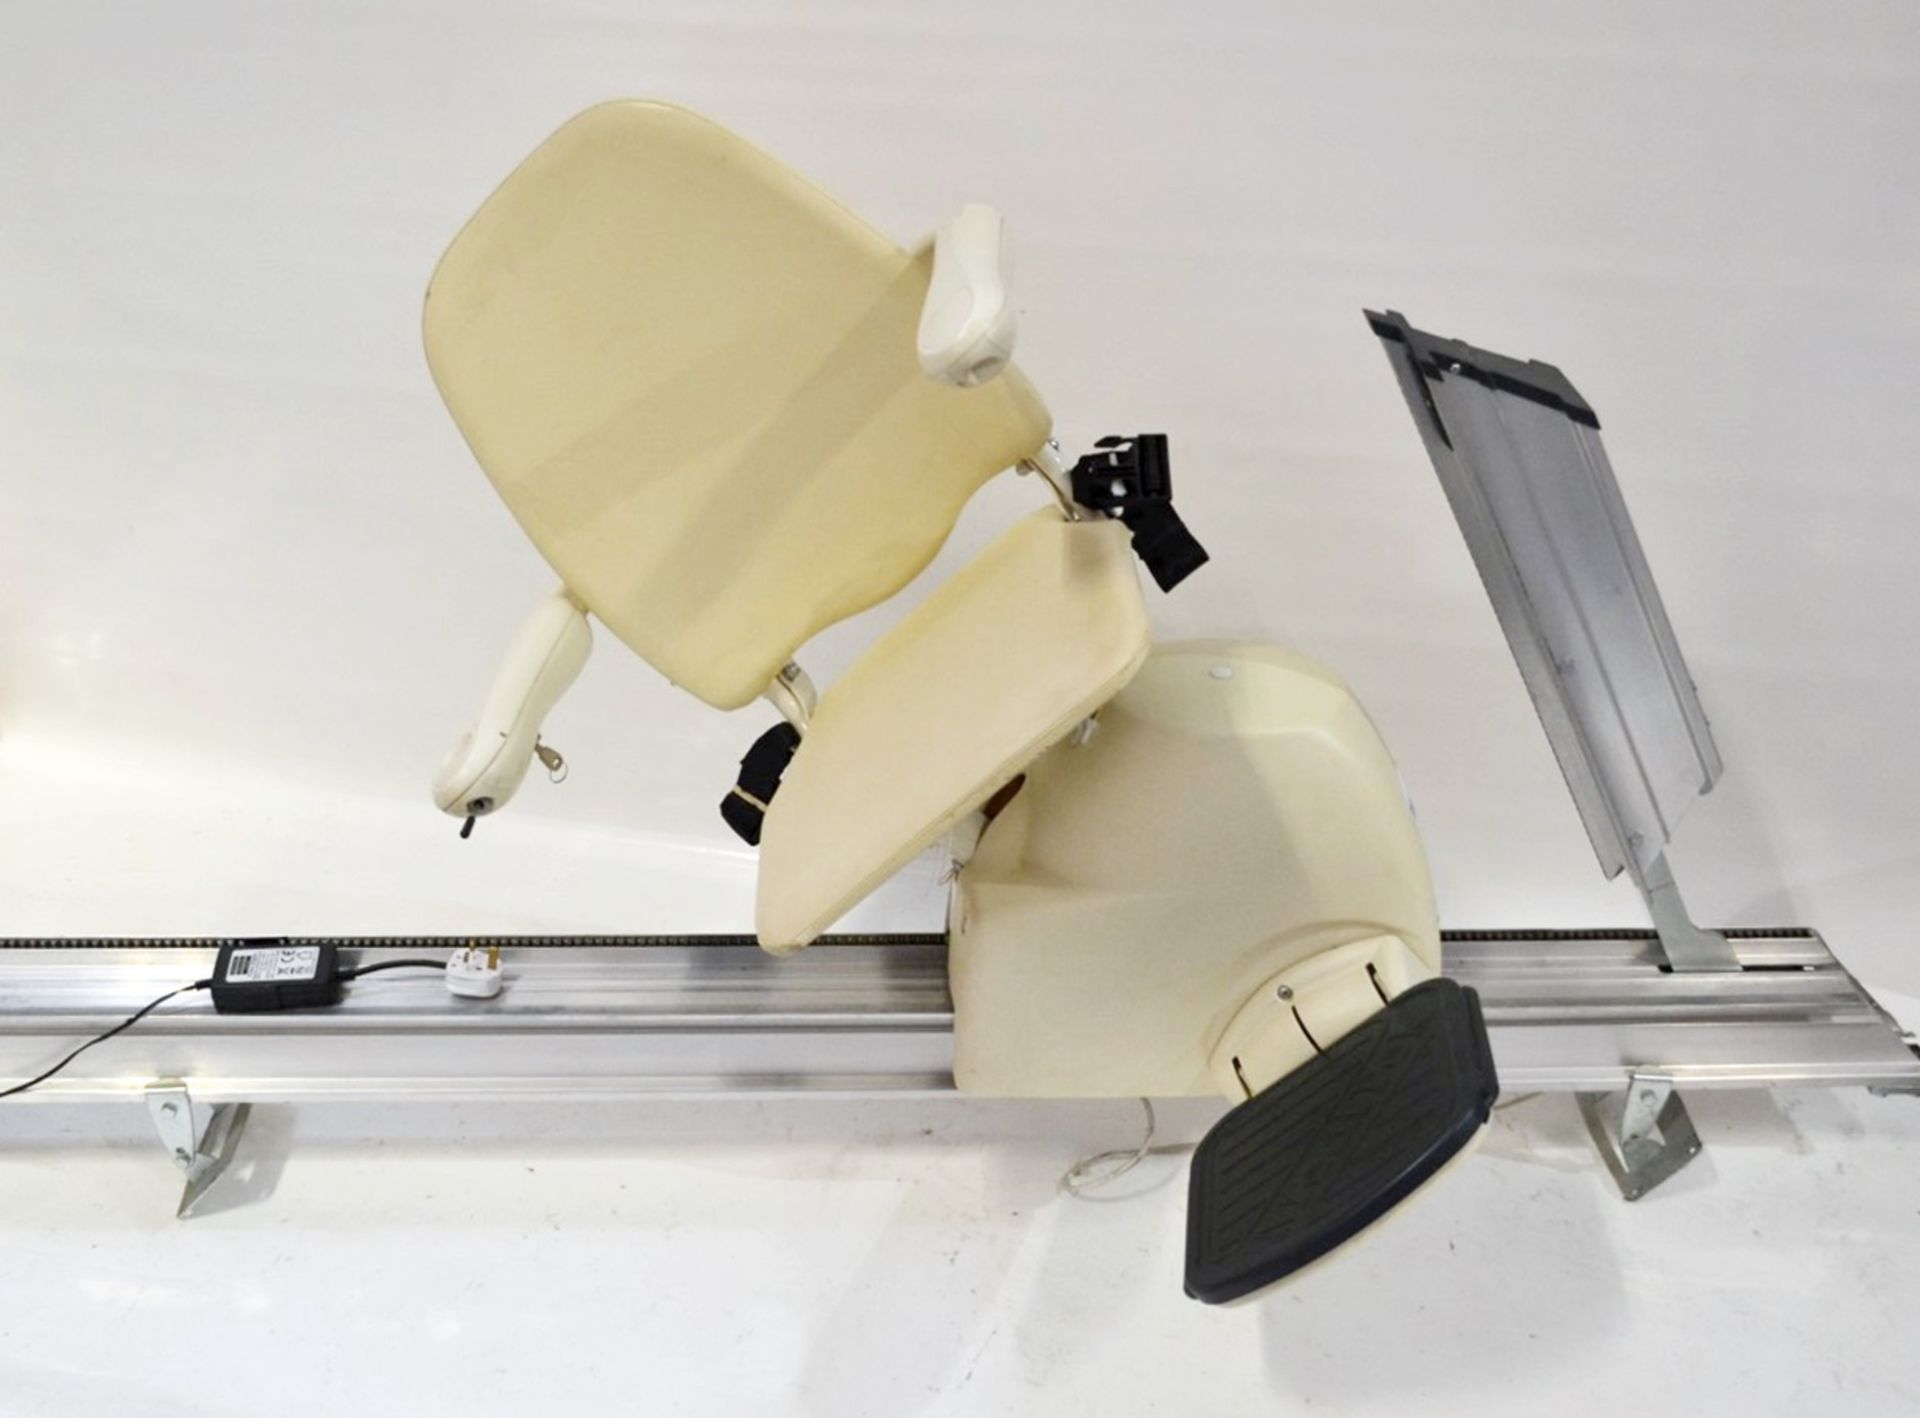 1 x Meditek D120 Deluxe Ascending Straight Stairlift With Powered Swivel Seat And Hinge Track - - Image 11 of 22